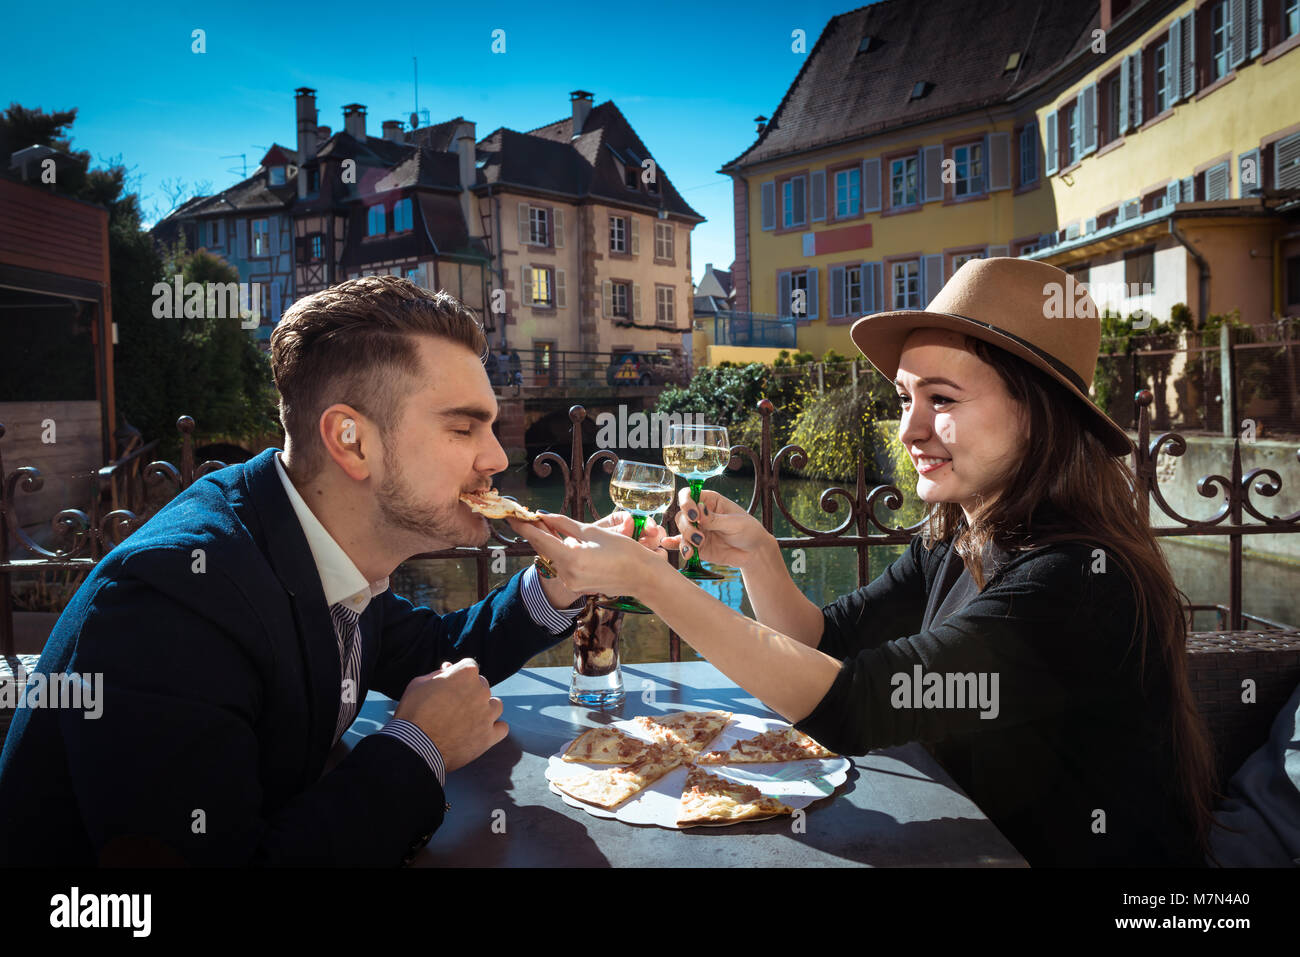 Young woman feeding boyfriend. Two stylish people sits together in local cafe with food and wine. Man in the suit eats pizza with girlfriend in Alsace Stock Photo